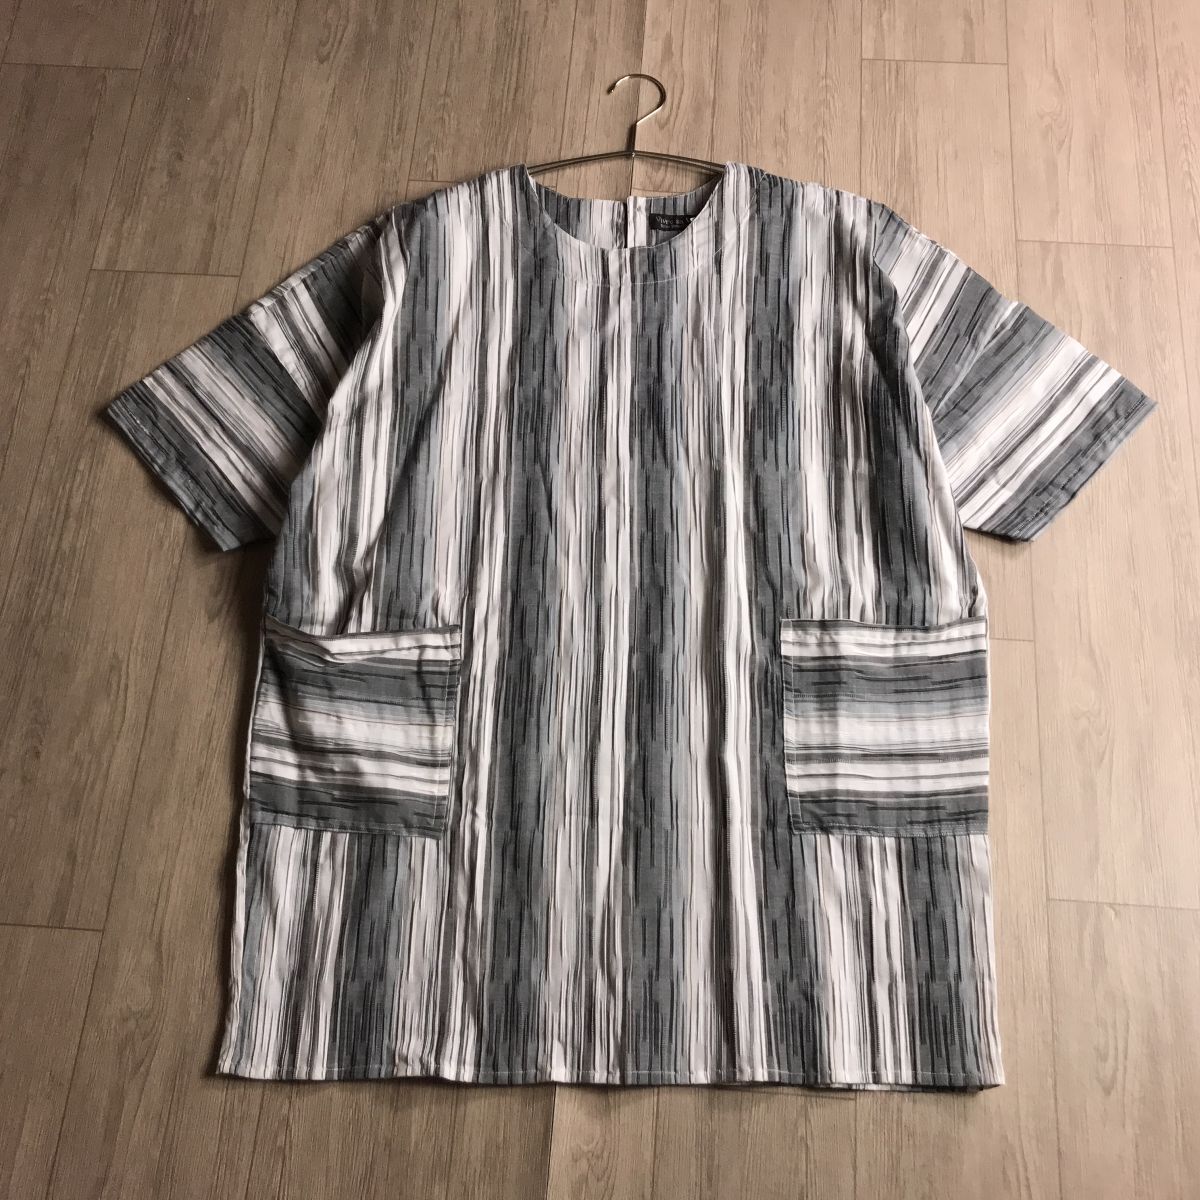 100 jpy start! tag attaching vivre sa vie pin tuck stripe tunic One-piece width easy body type cover 